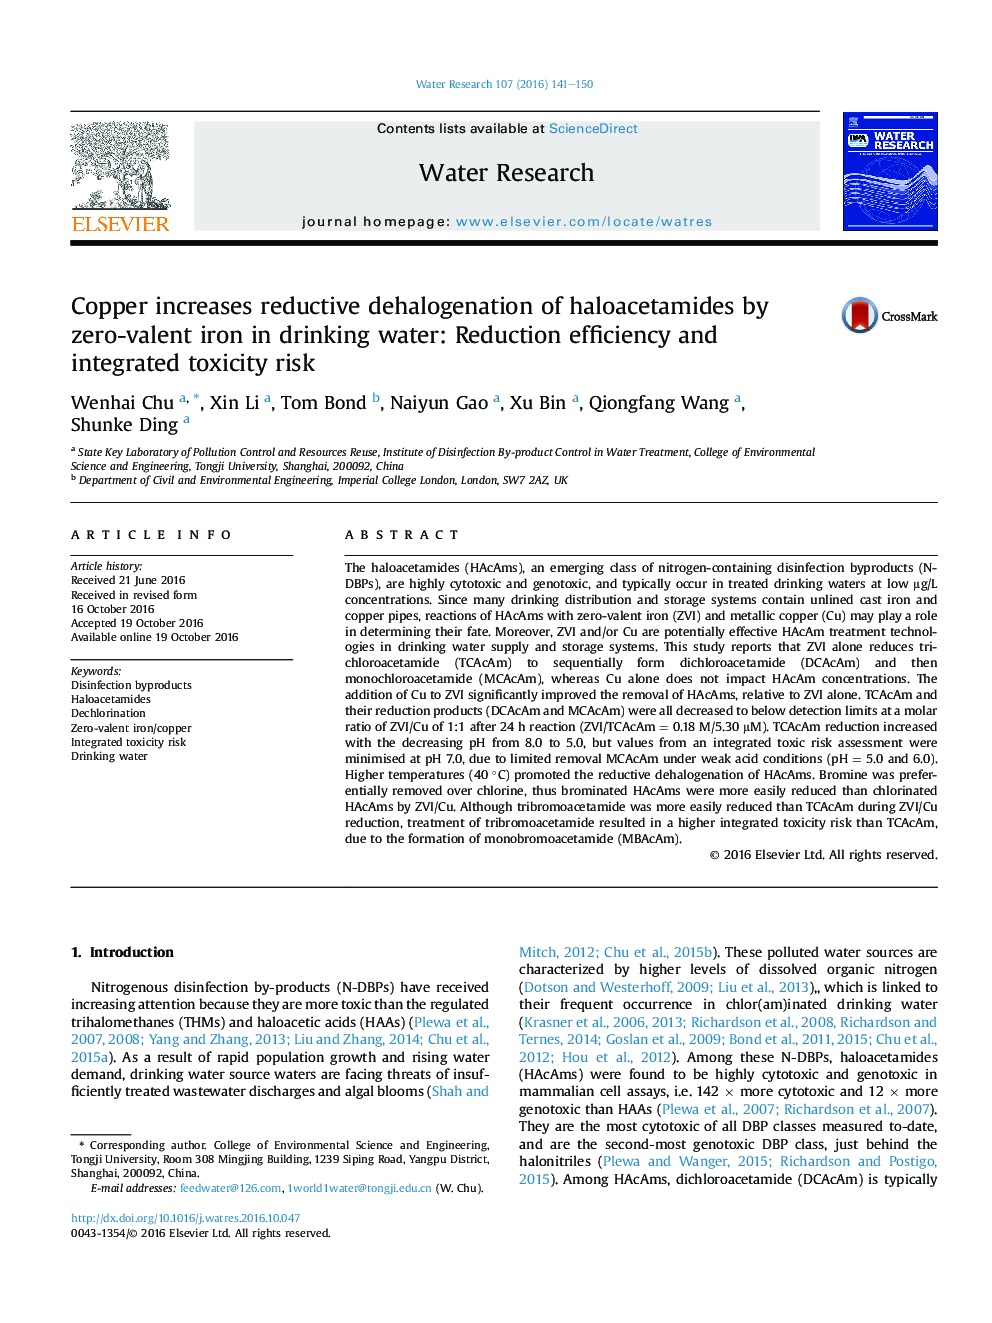 Copper increases reductive dehalogenation of haloacetamides by zero-valent iron in drinking water: Reduction efficiency and integrated toxicity risk